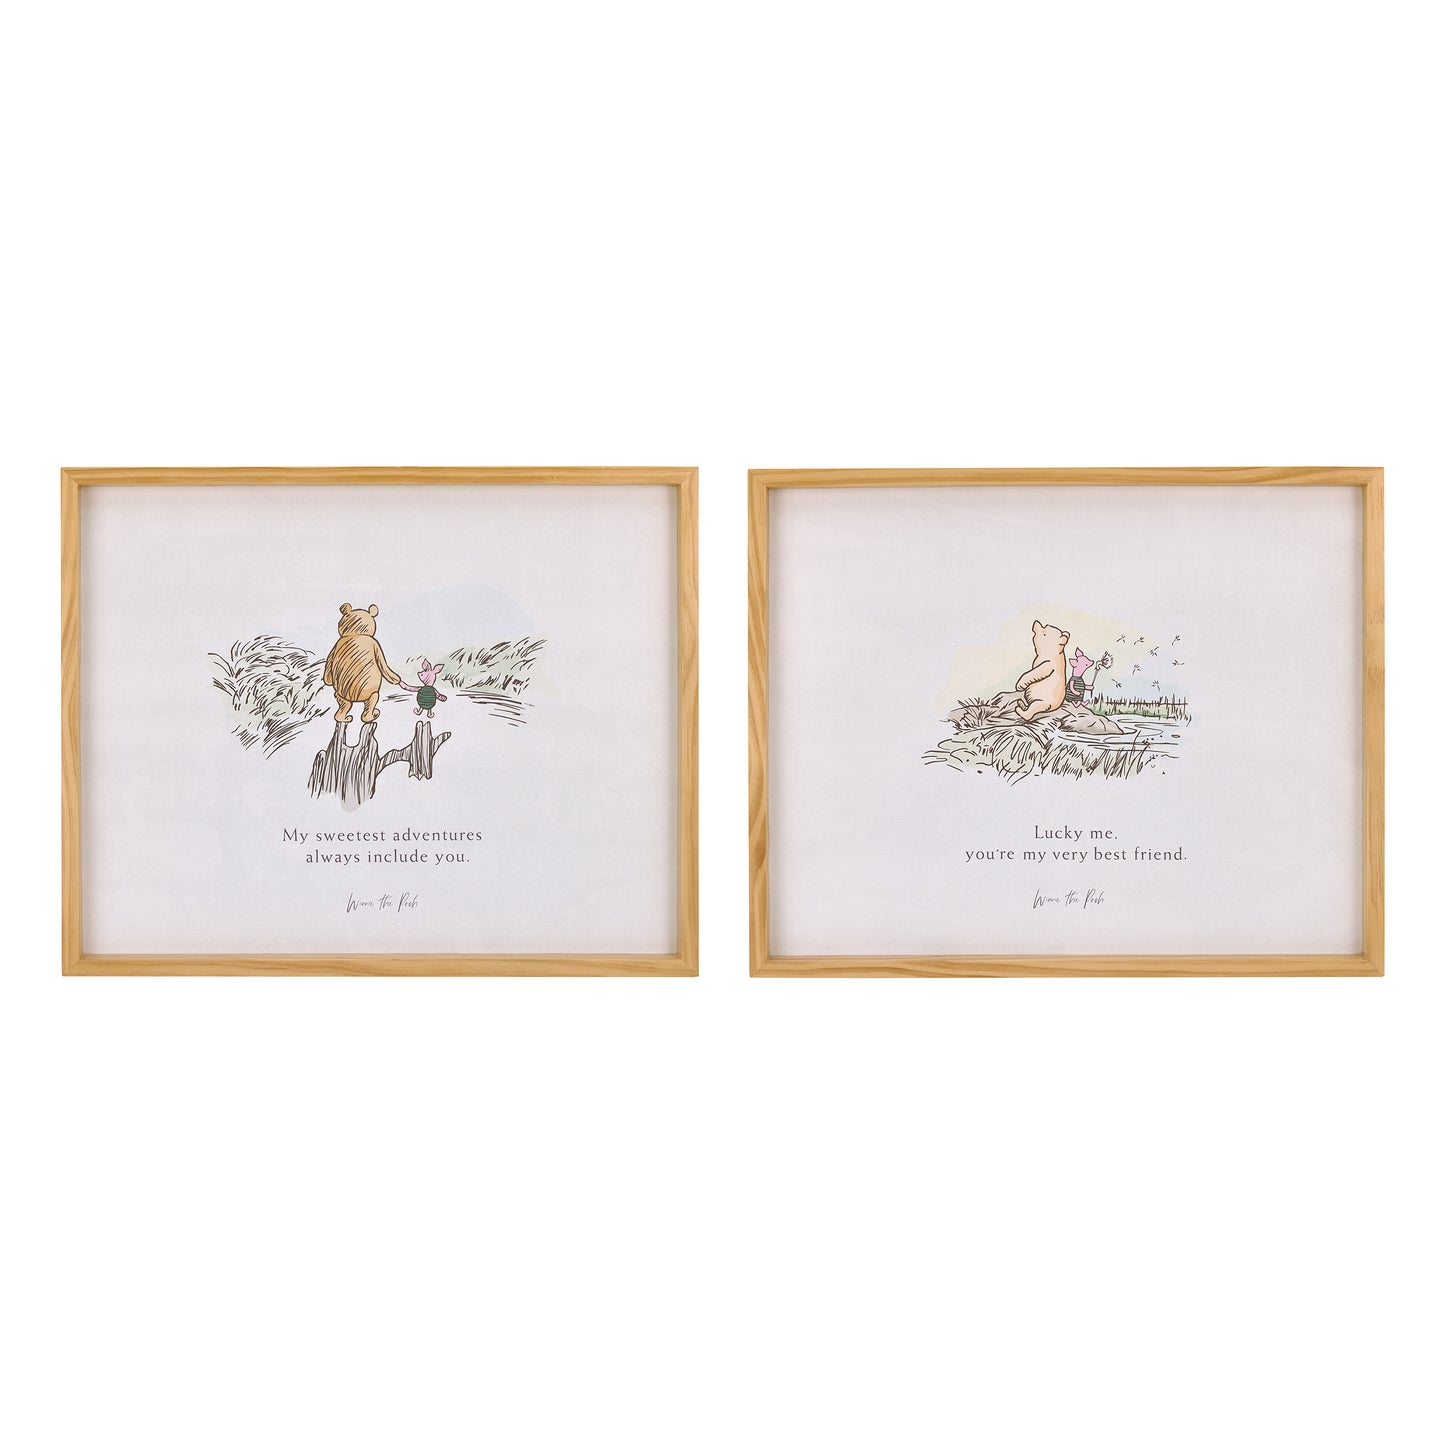 Disney Winnie the Pooh - Classic Pooh "My Sweetest Adventures Always Include You" with Piglet Natural Pine Wood Framed Art Canvas Wall Décor